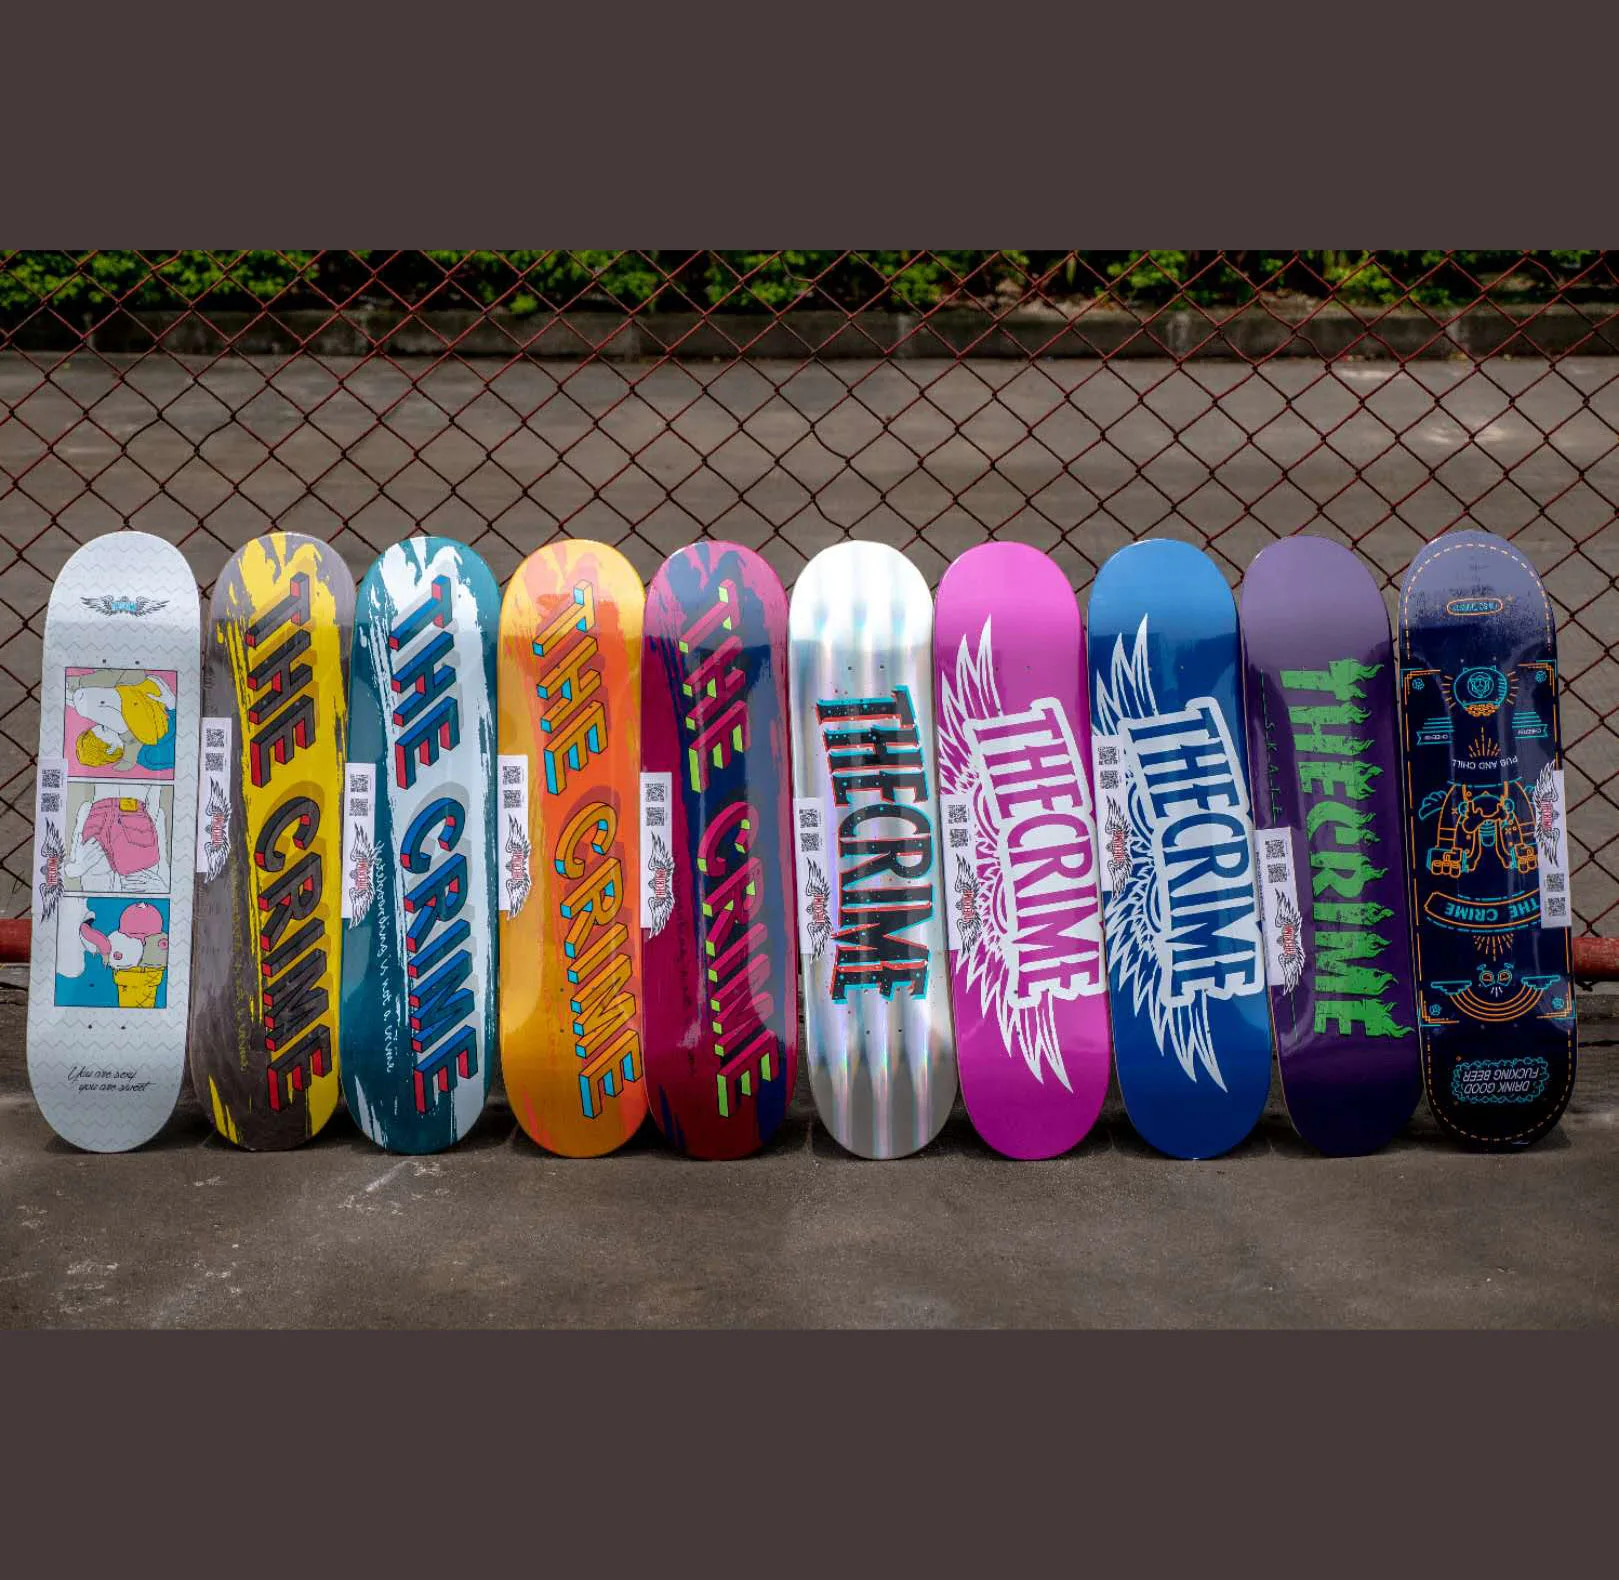 

skateboard Canadian maple wood professional cruiser fish skate board deck completes high quality foil graphics pro boards